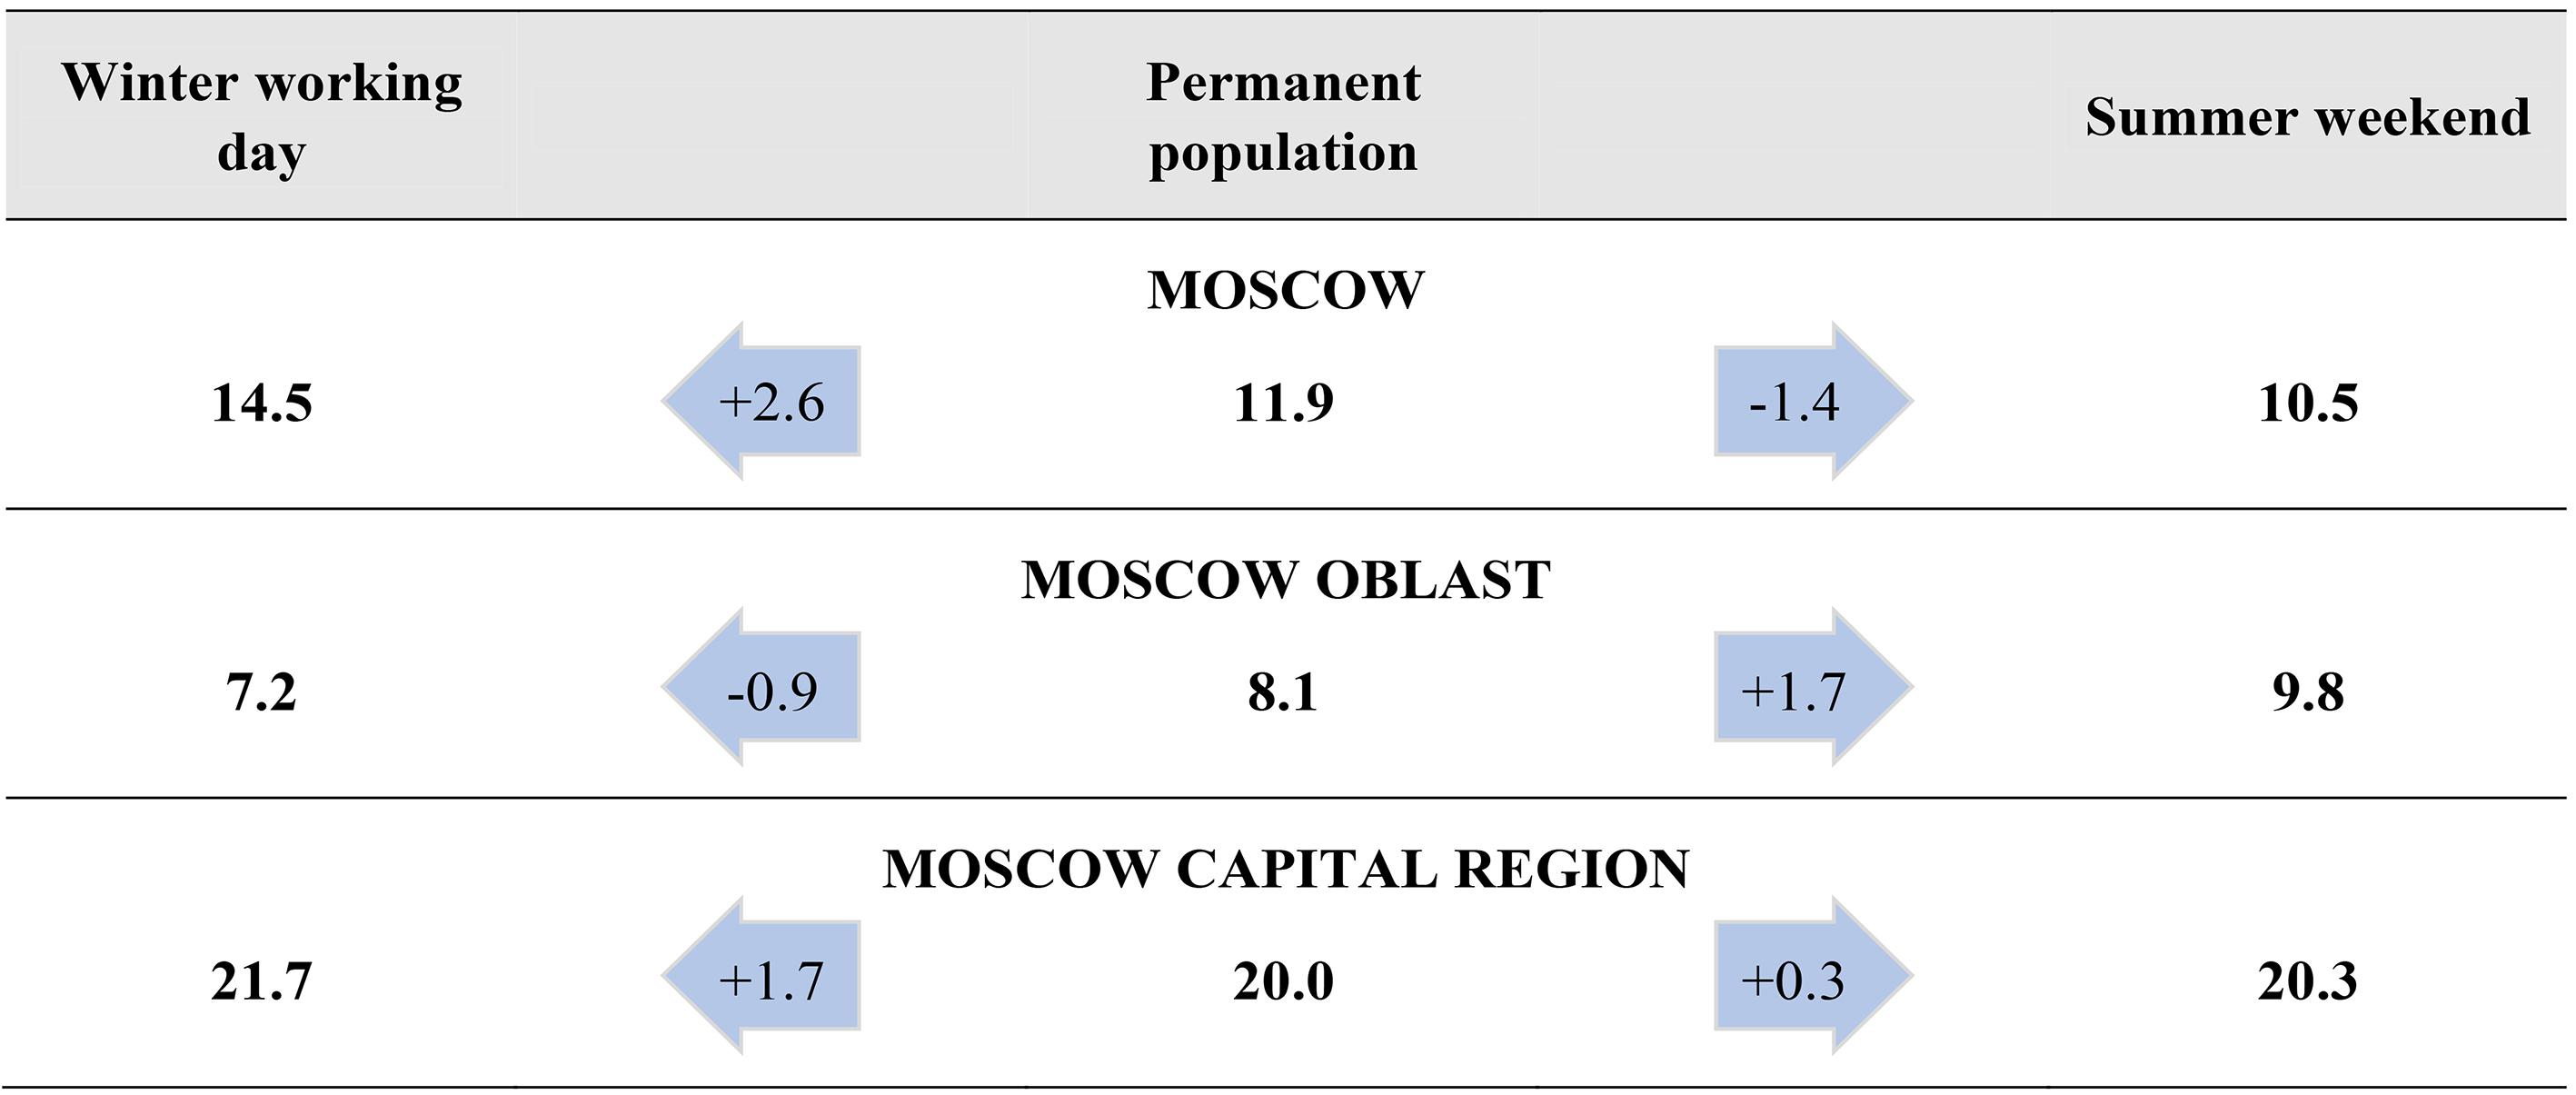 Fluctuations of the daylight population of Moscow and Moscow oblast in 2018 (in million people). Source: authors’ estimations.